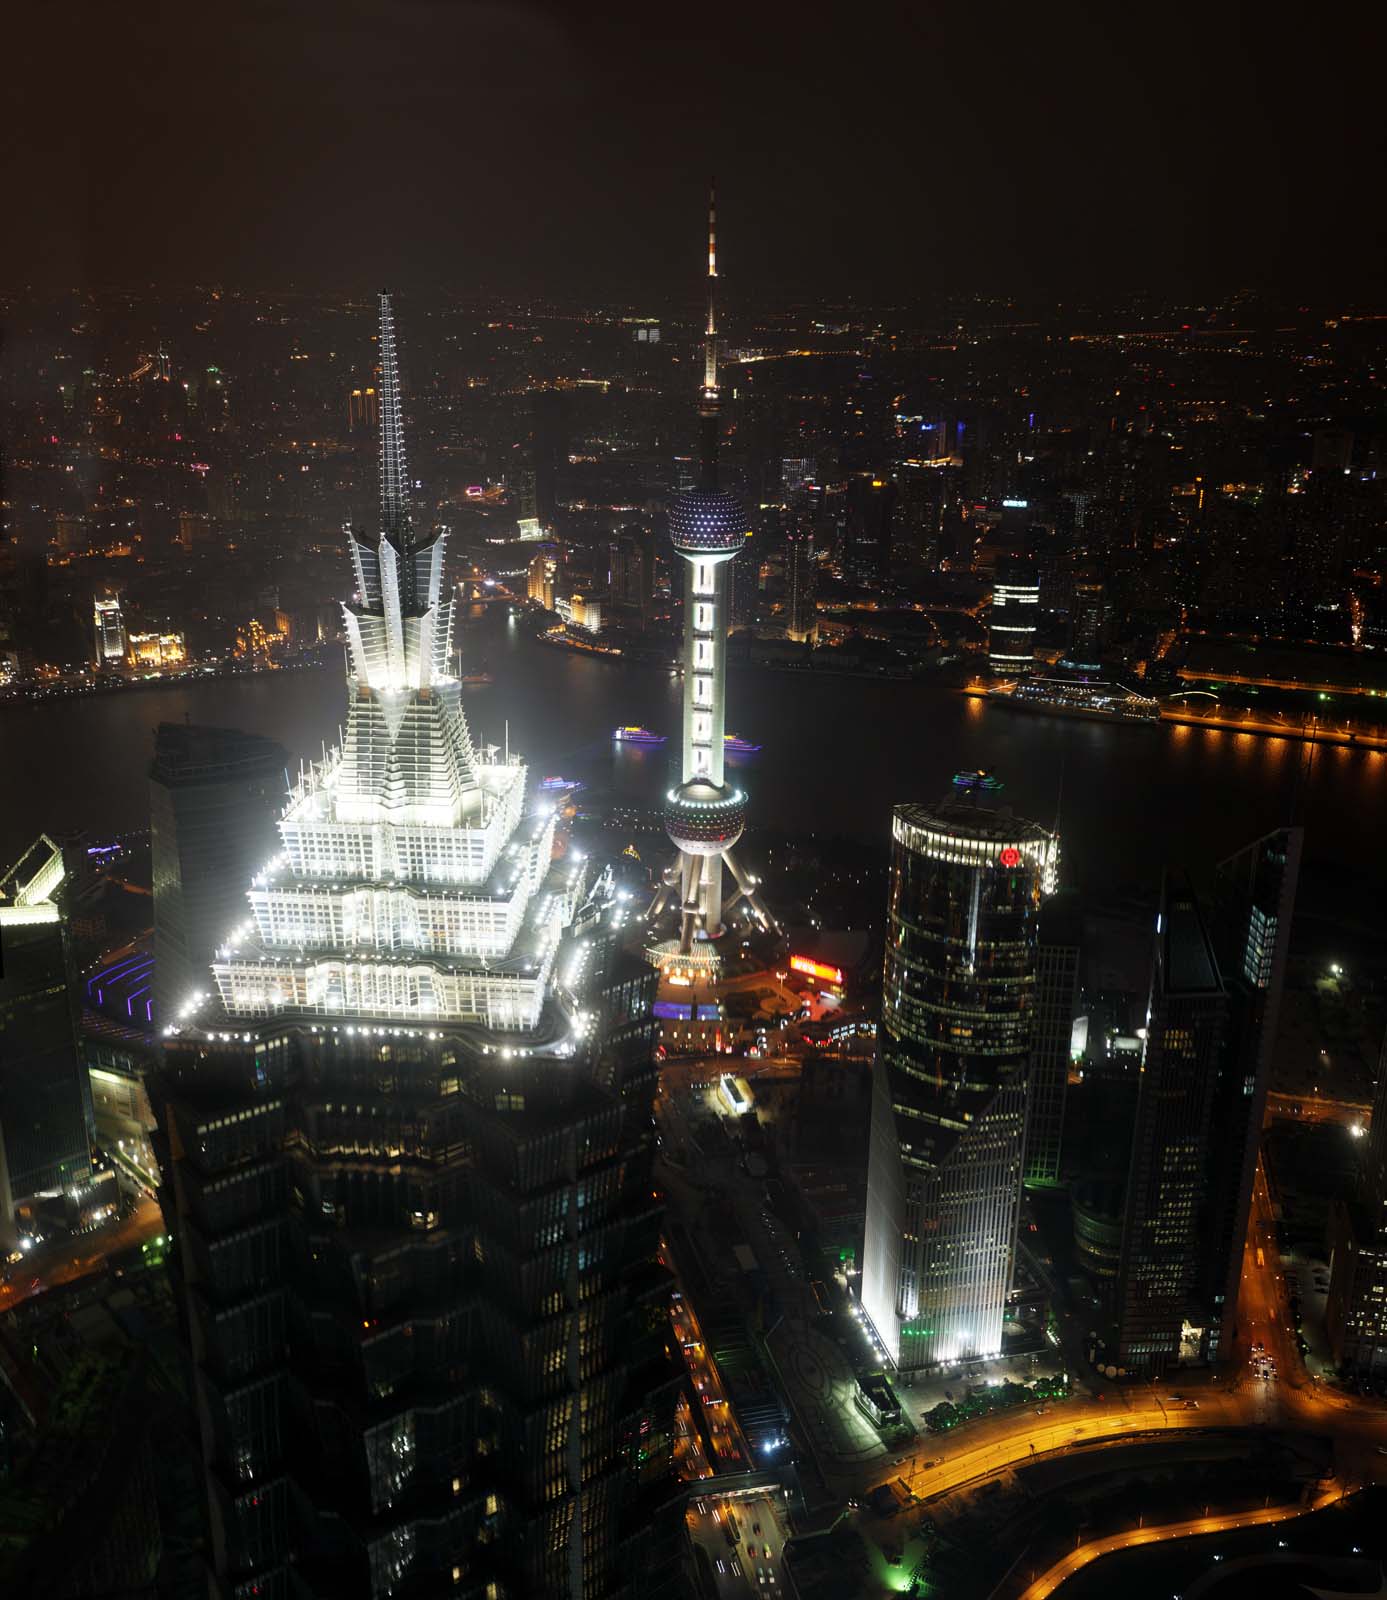 photo,material,free,landscape,picture,stock photo,Creative Commons,A night view of Shanghai, Shanghai, World Financial Center, observatory, night